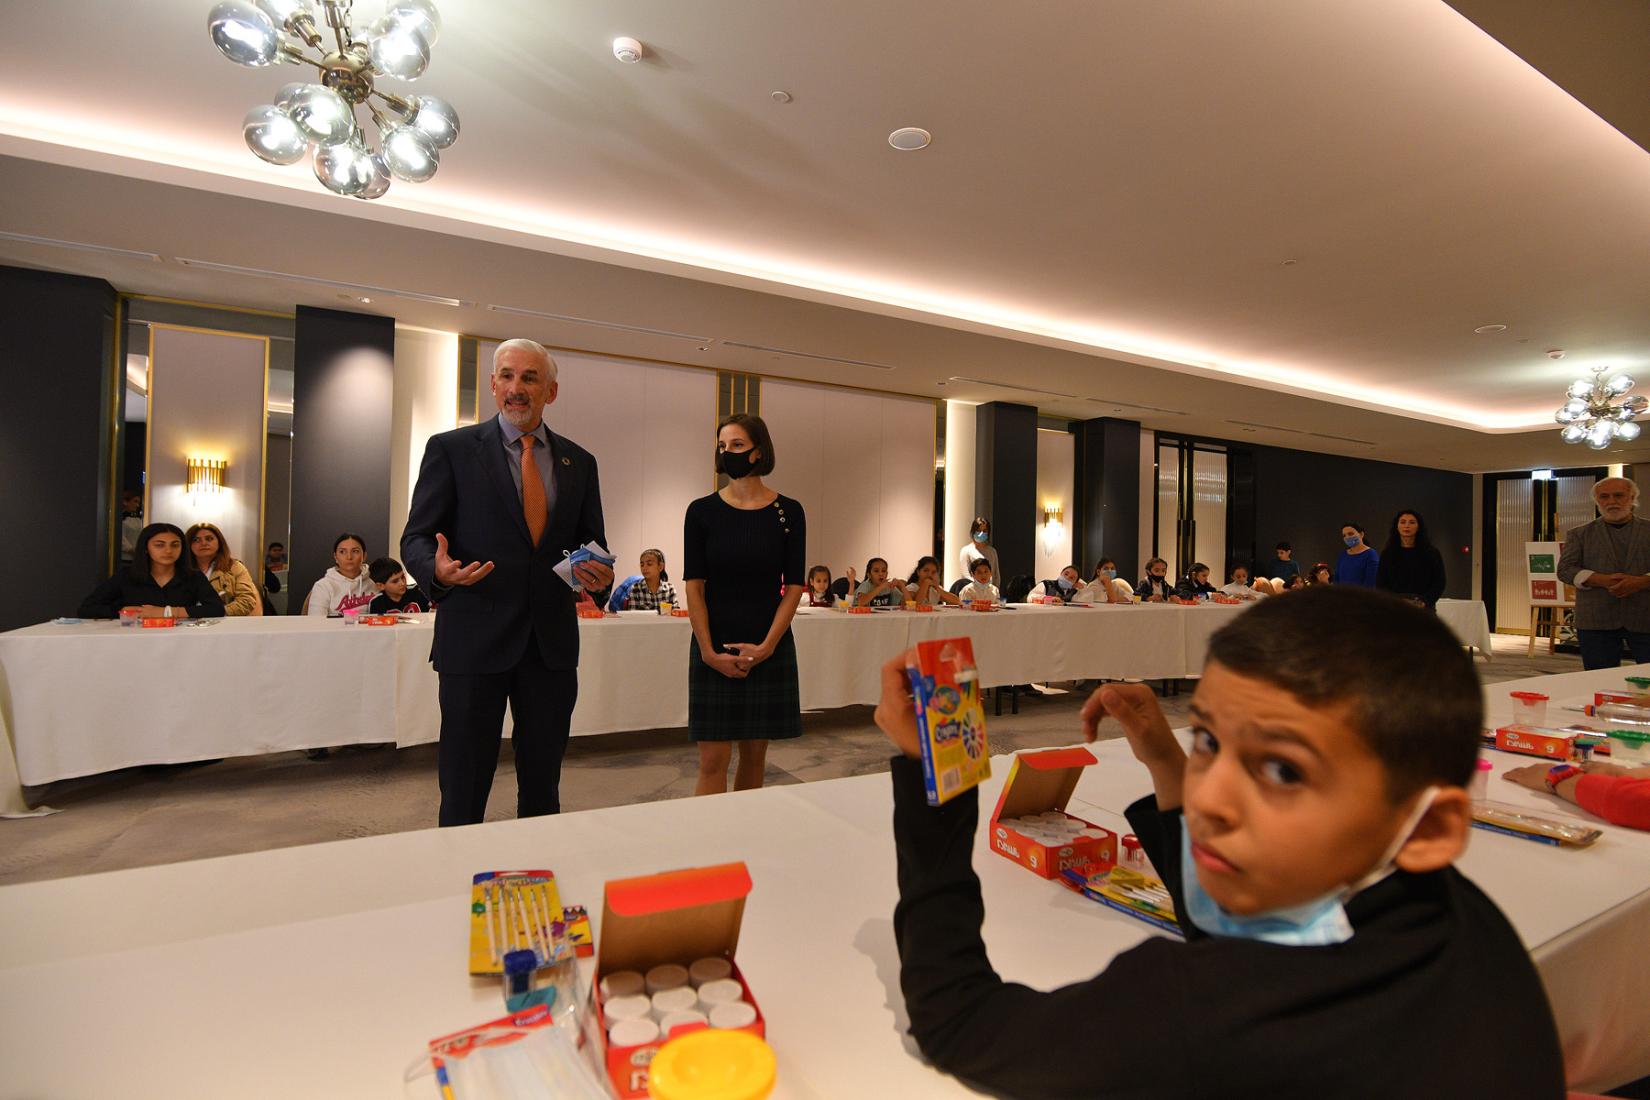 UN Resident Coordinator in Armenia plays a quizz with the kids.